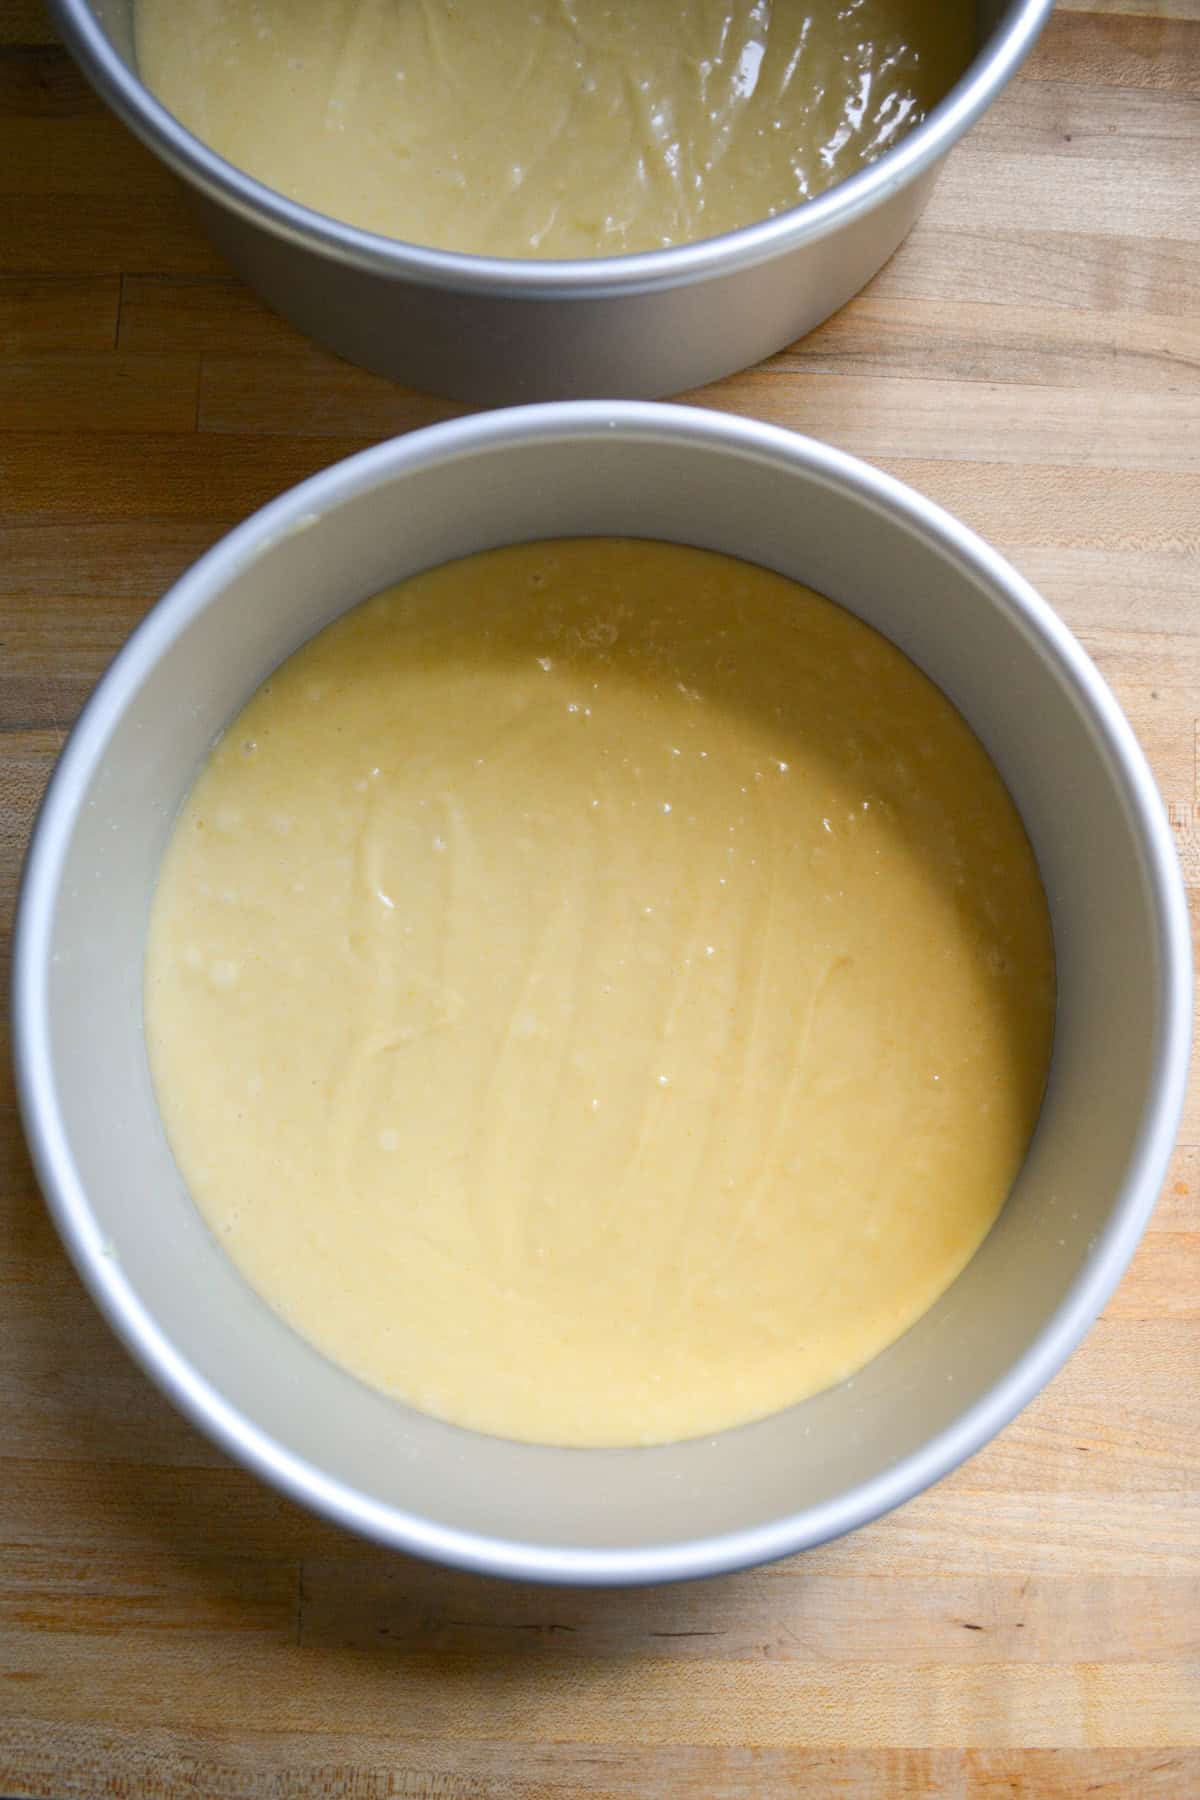 Cake batter divided into two prepared 8-inch round cake pans.